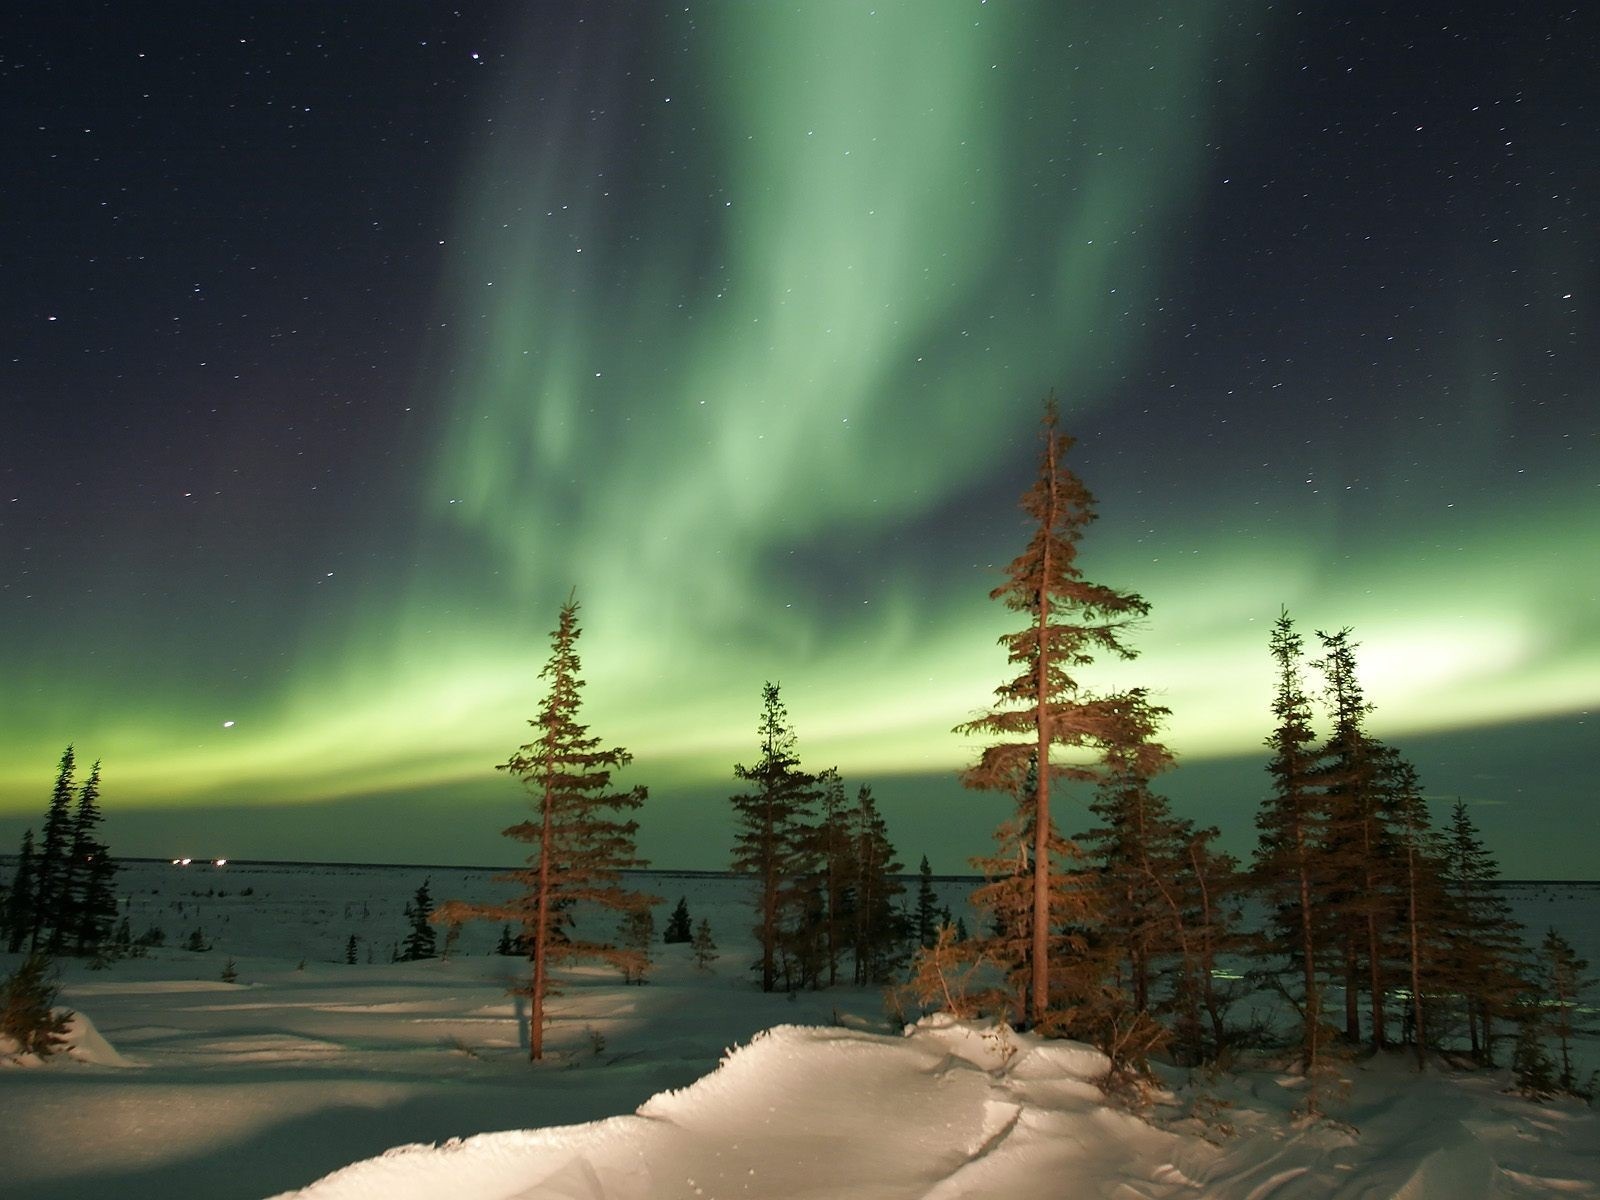 Natural wonders of the Northern Lights HD Wallpaper (2) #3 - 1600x1200